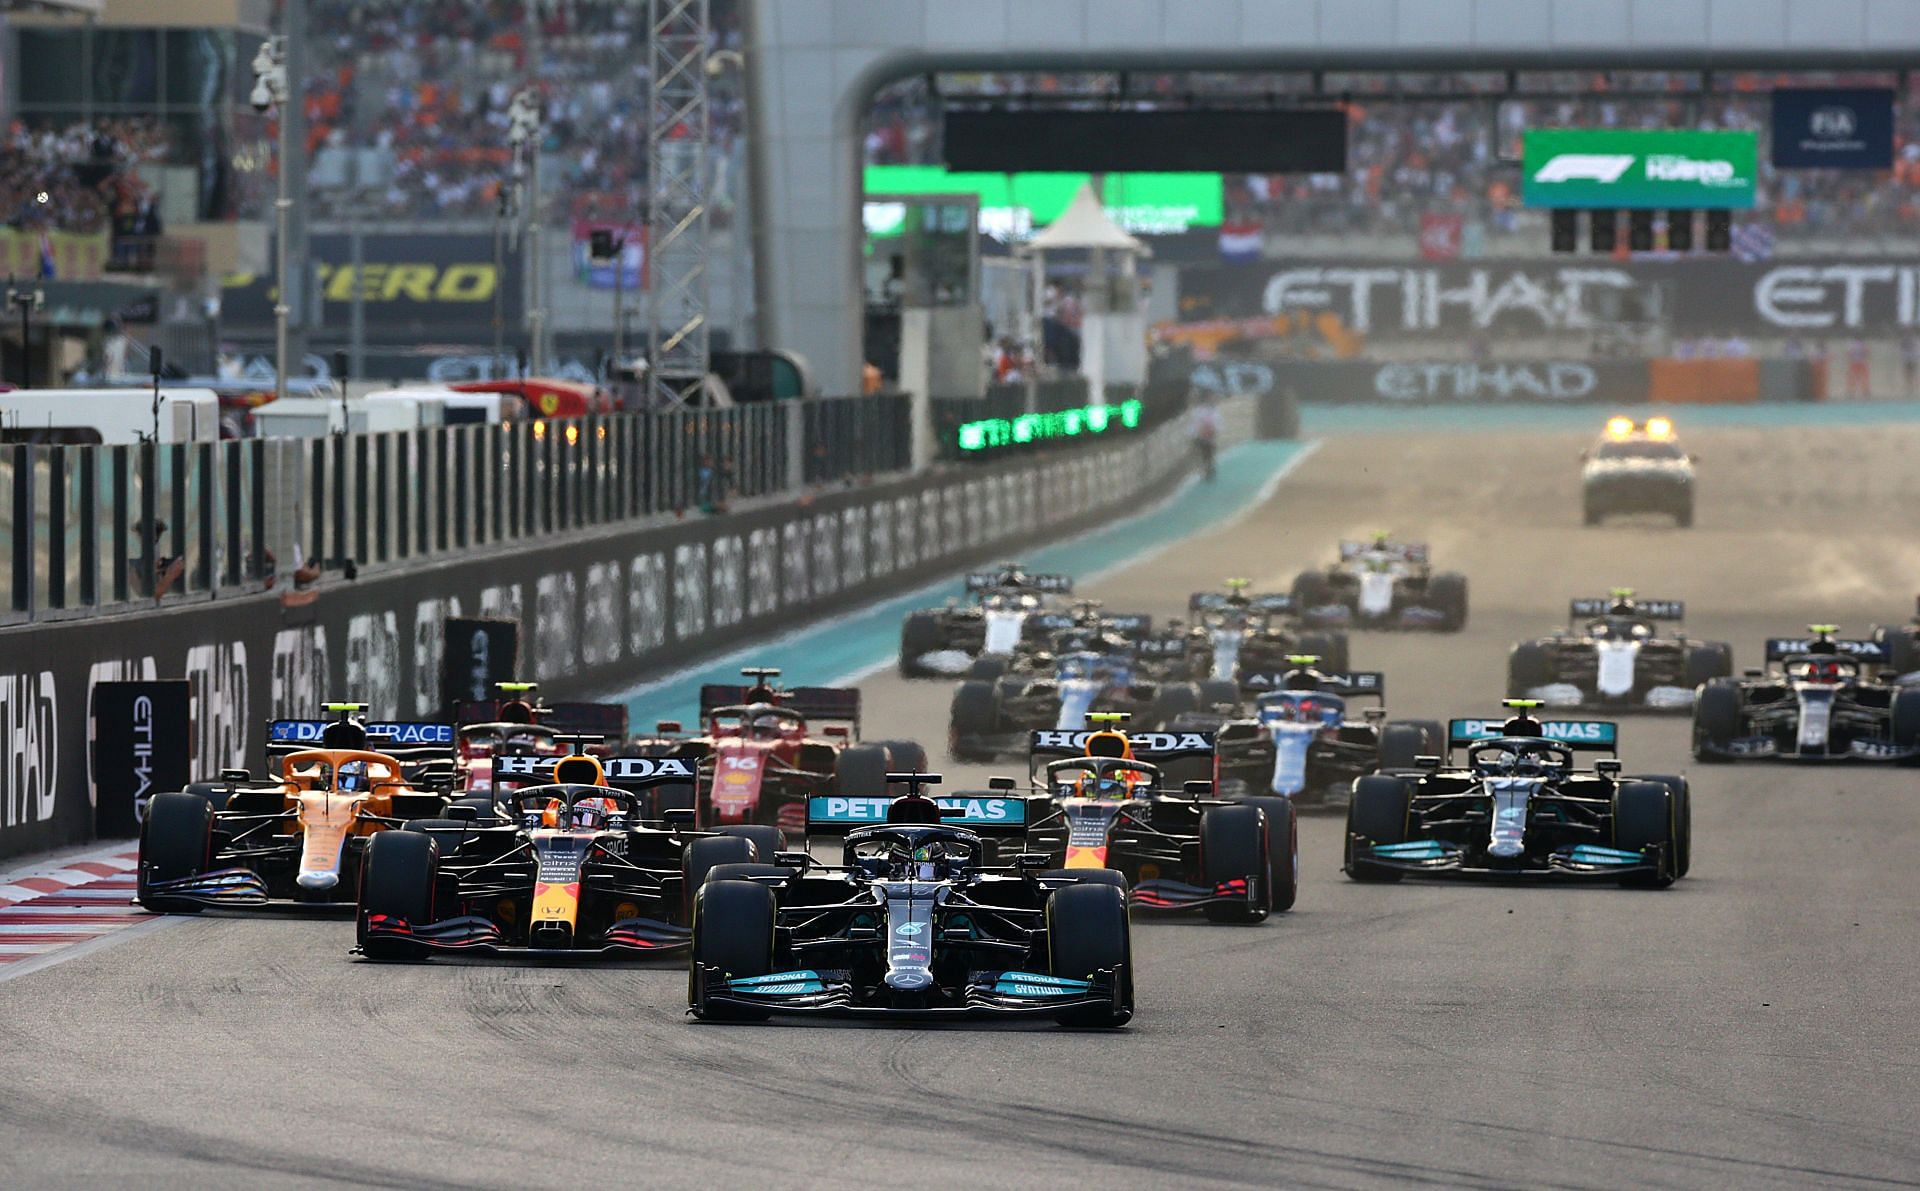 Lewis Hamilton leads Max Verstappen and the rest of the field at the start during the 2021 season finale in Abu Dhabi (Photo by Peter Fox/Getty Images)